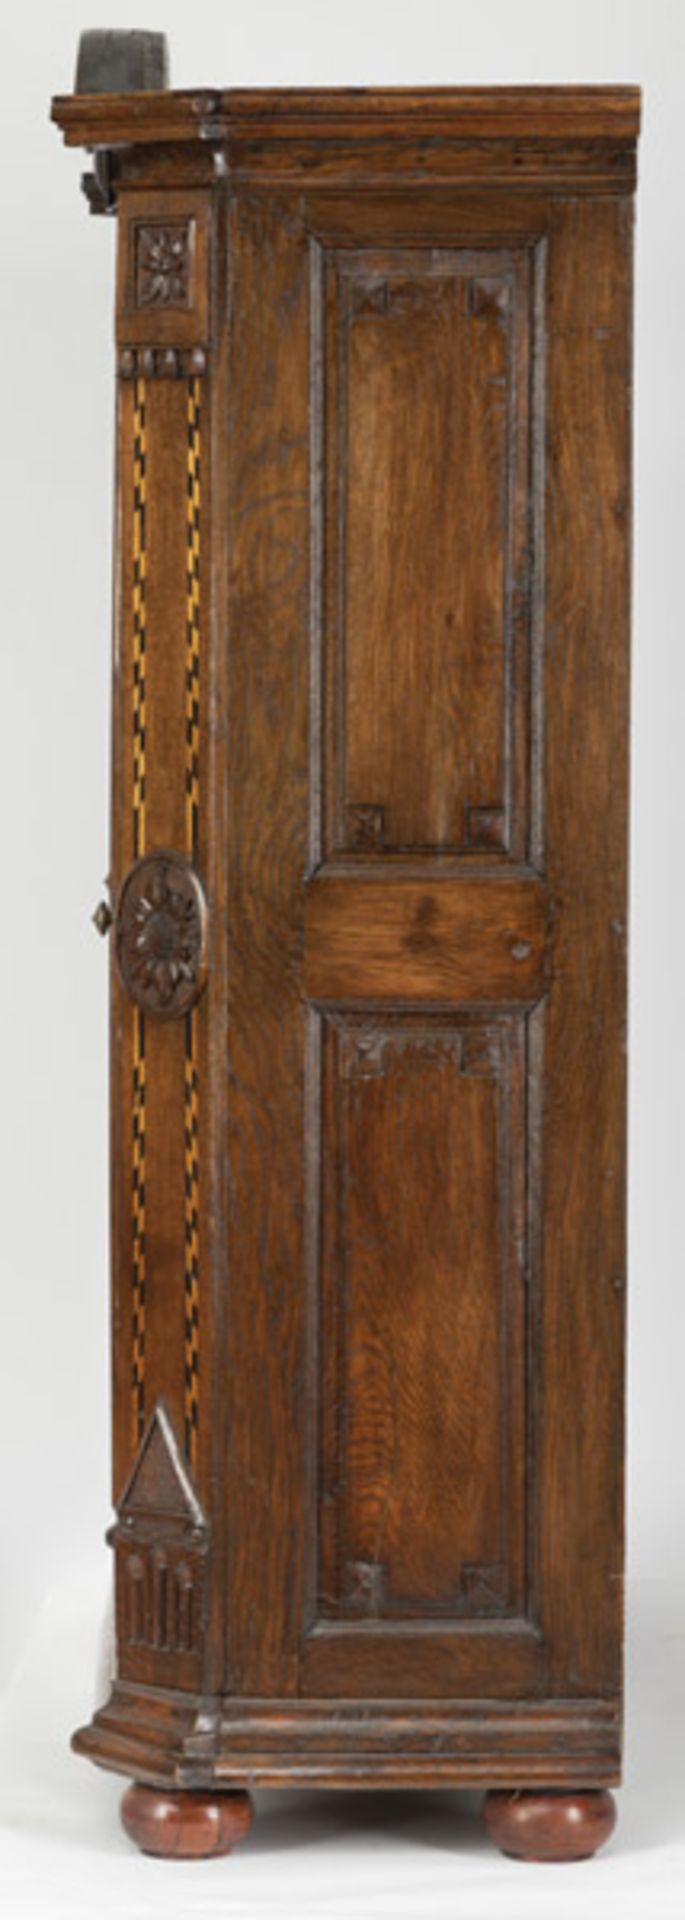 A NEOCLASSICAL BRASS MOUNTED CARVED OAKWOOD FRUITWOOD AND BOG OAK CUPBOARD - Image 4 of 6